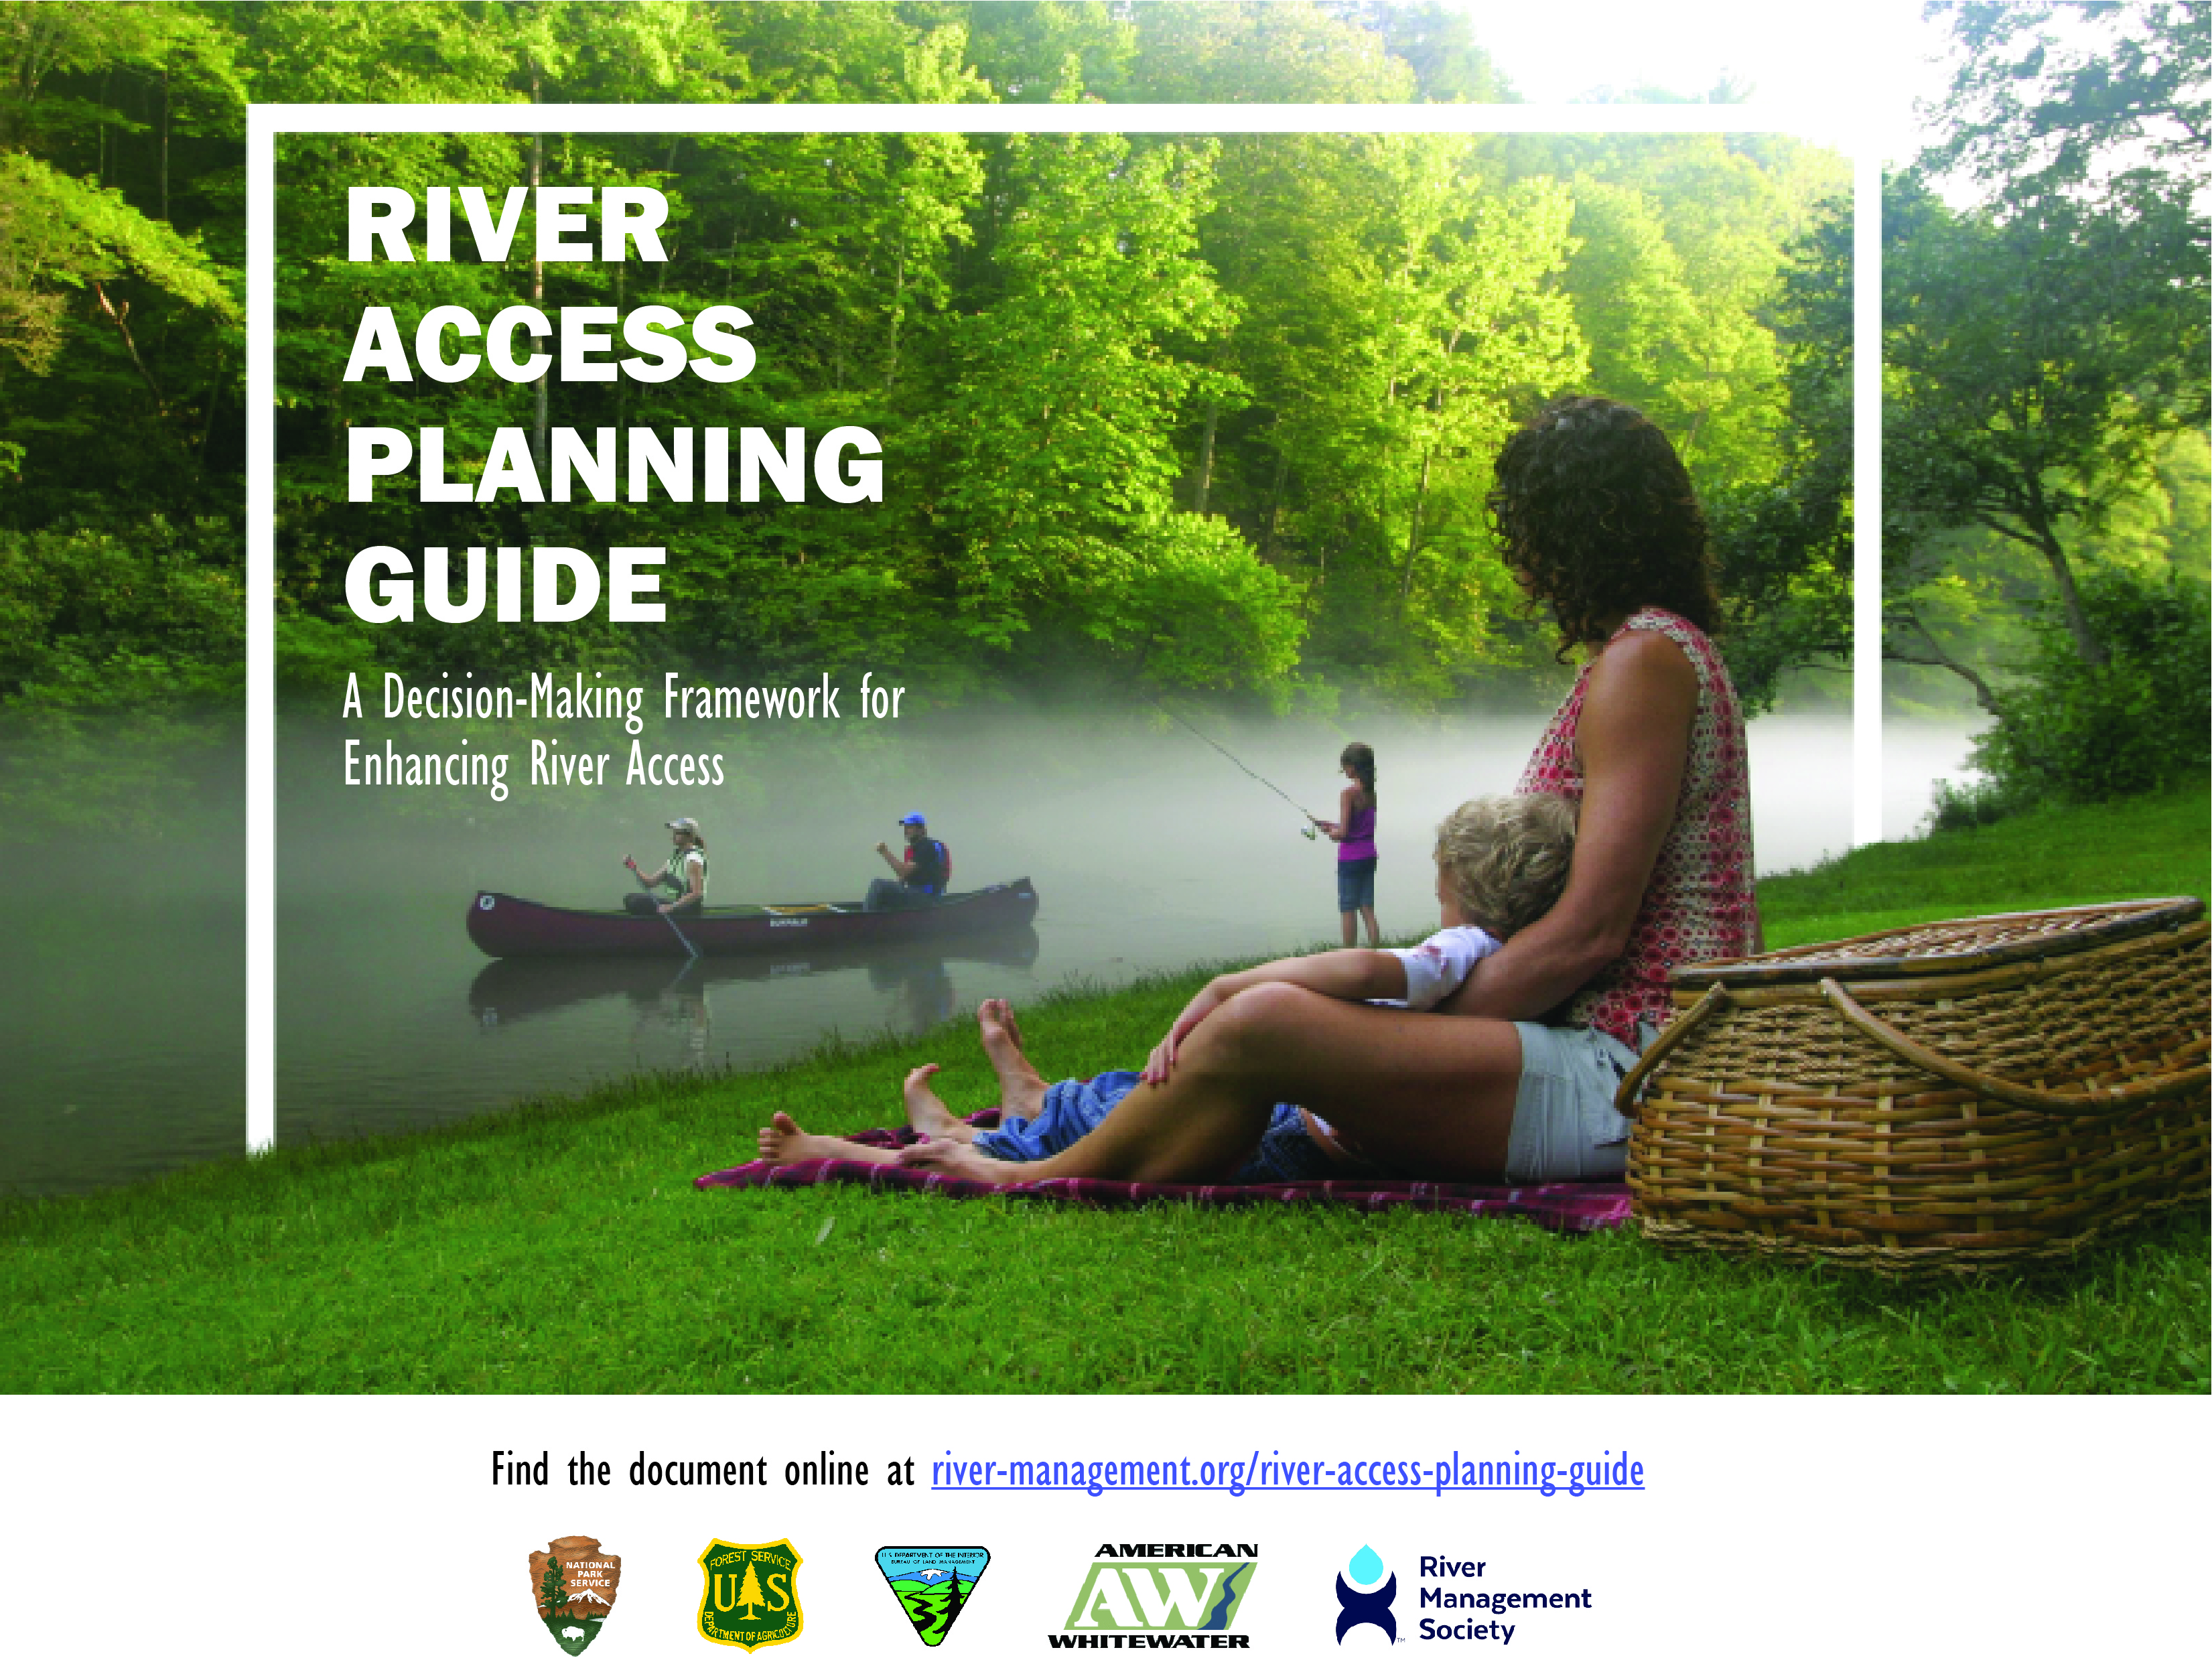 Promotional image for River Access Guide. Person sitting on a grassy hill, looking at canoers and anglers in the river.